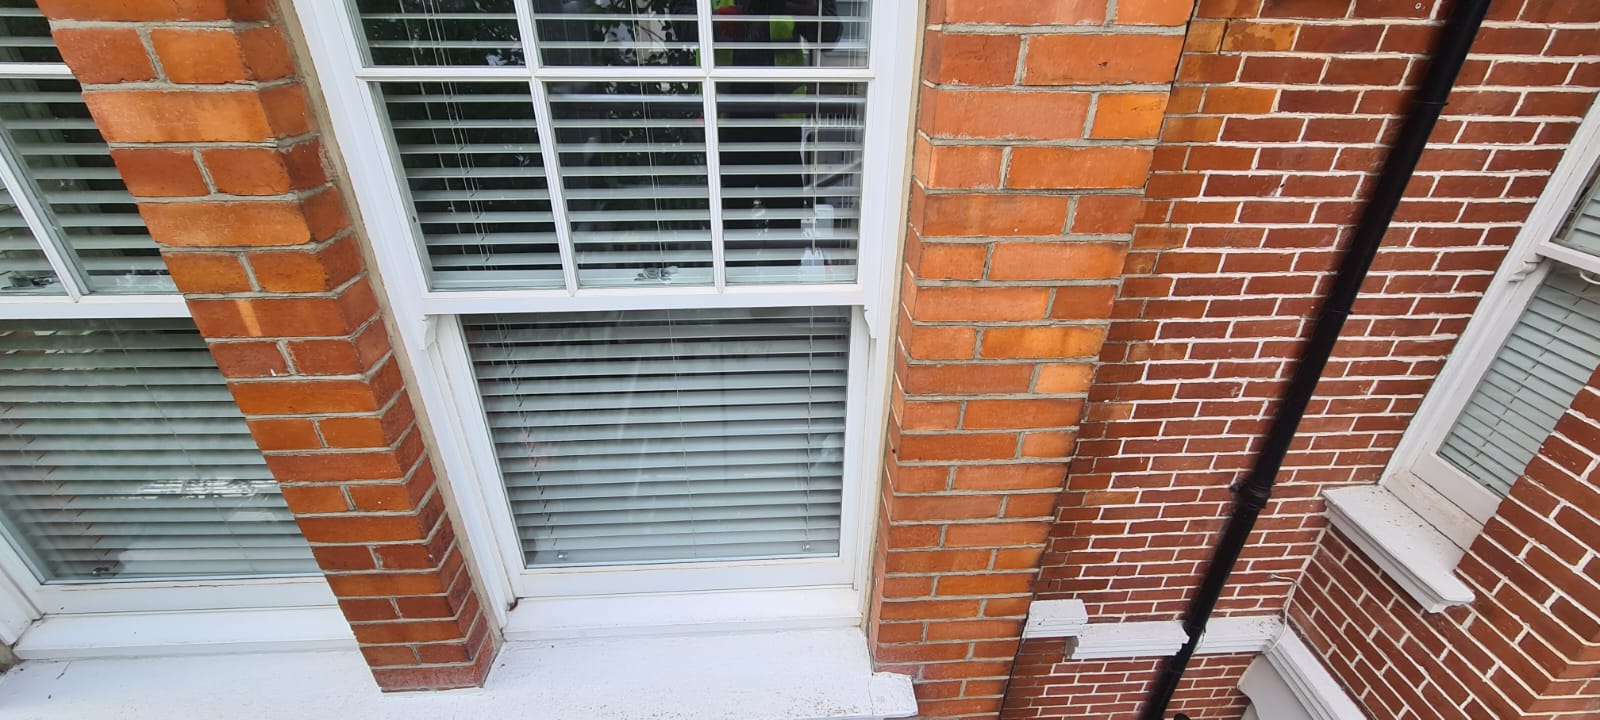 Cleaned Brick wall surrounding a window.